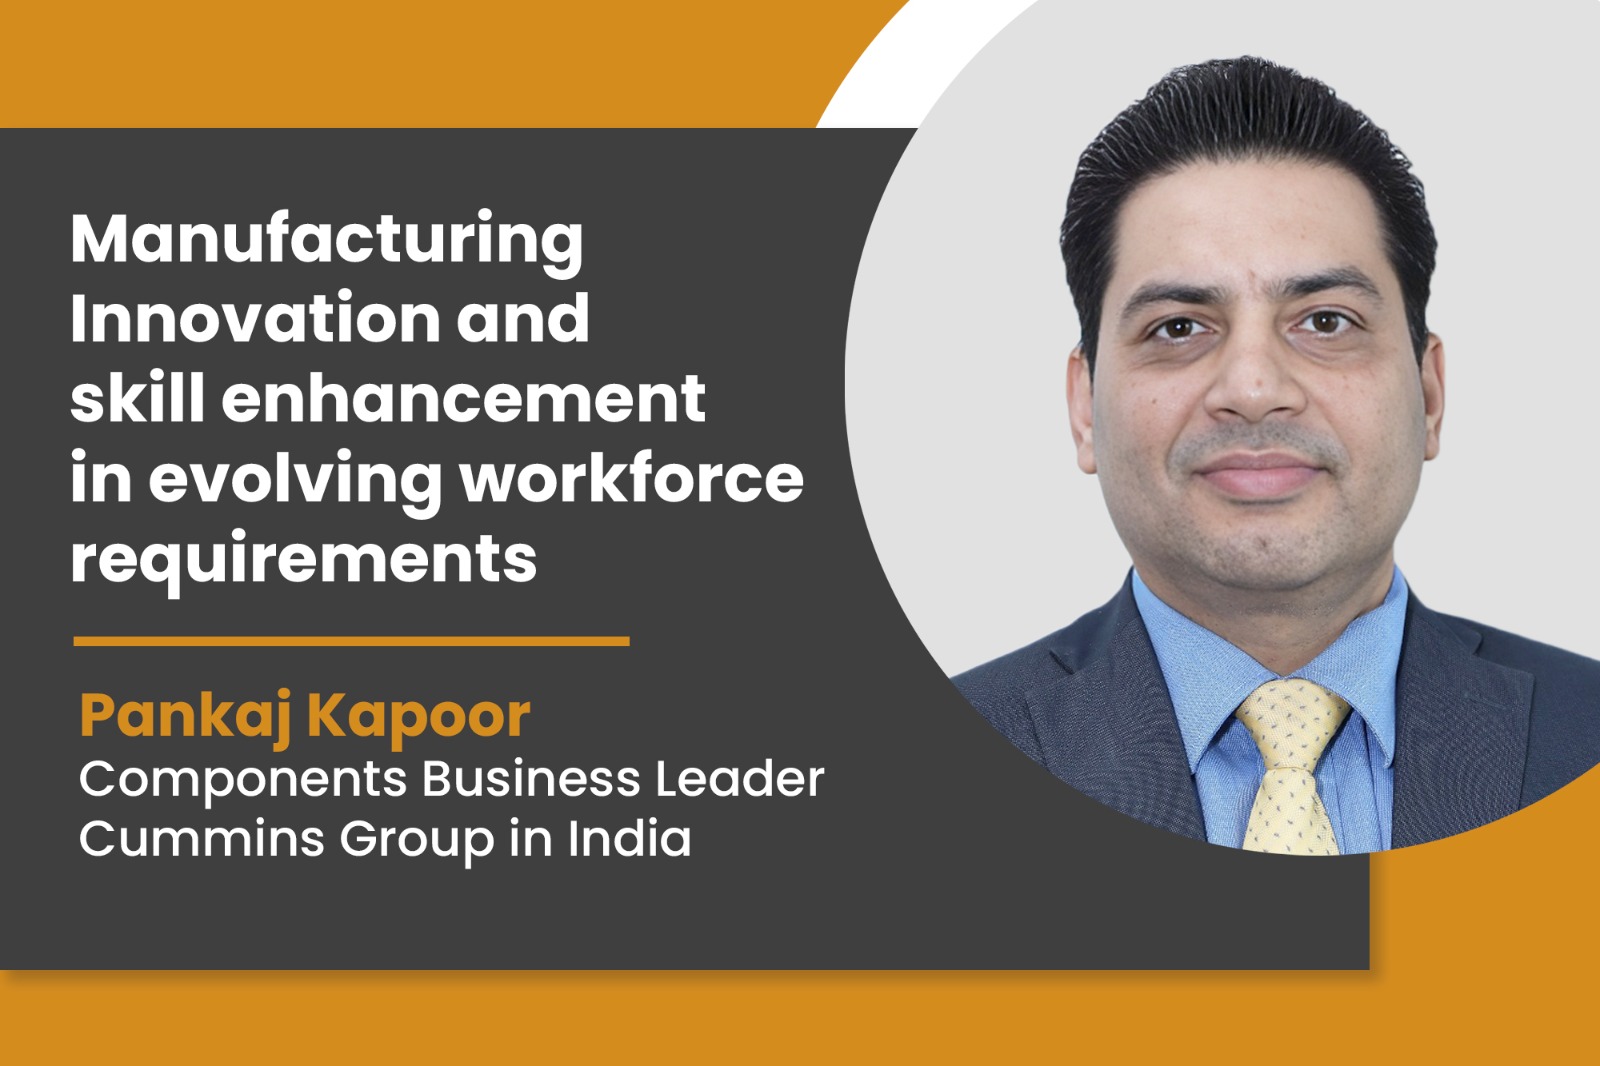 Manufacturing innovation and skill enhancement in evolving workforce requirements